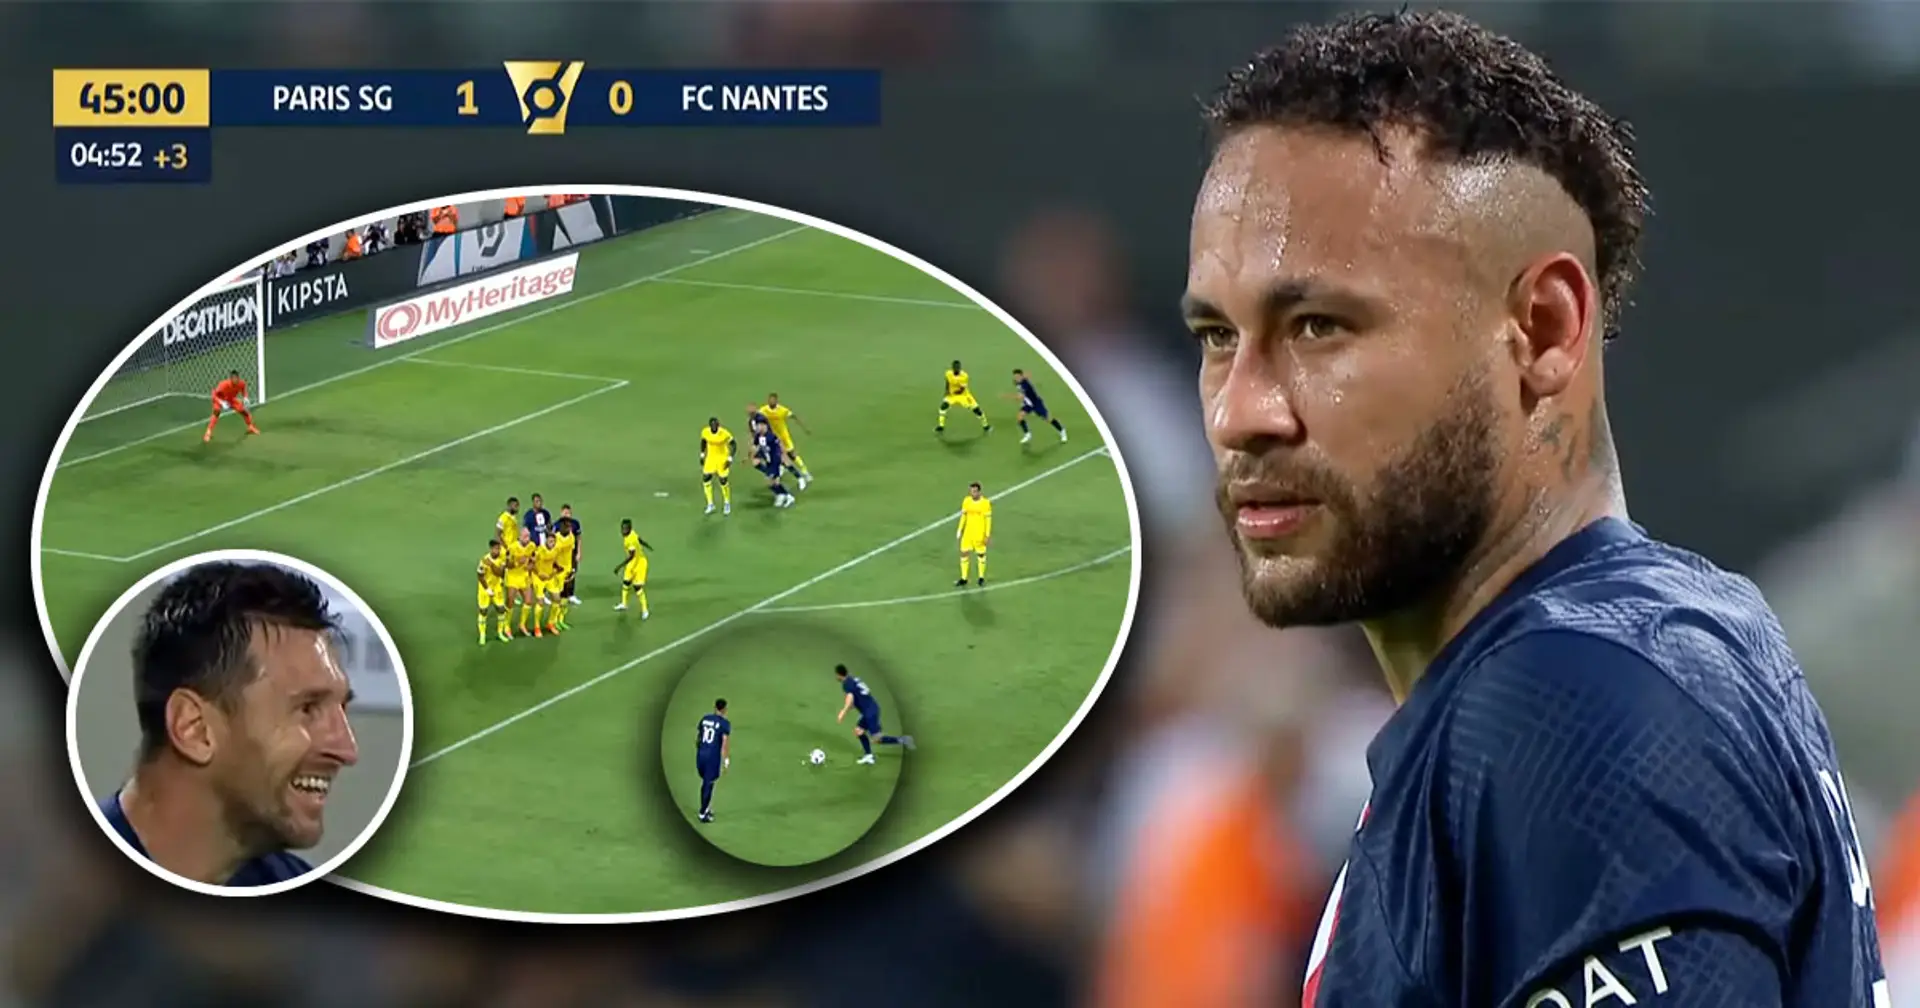 'What a duo': Neymar scores brilliant free kick for PSG, Messi contributes with tricky move